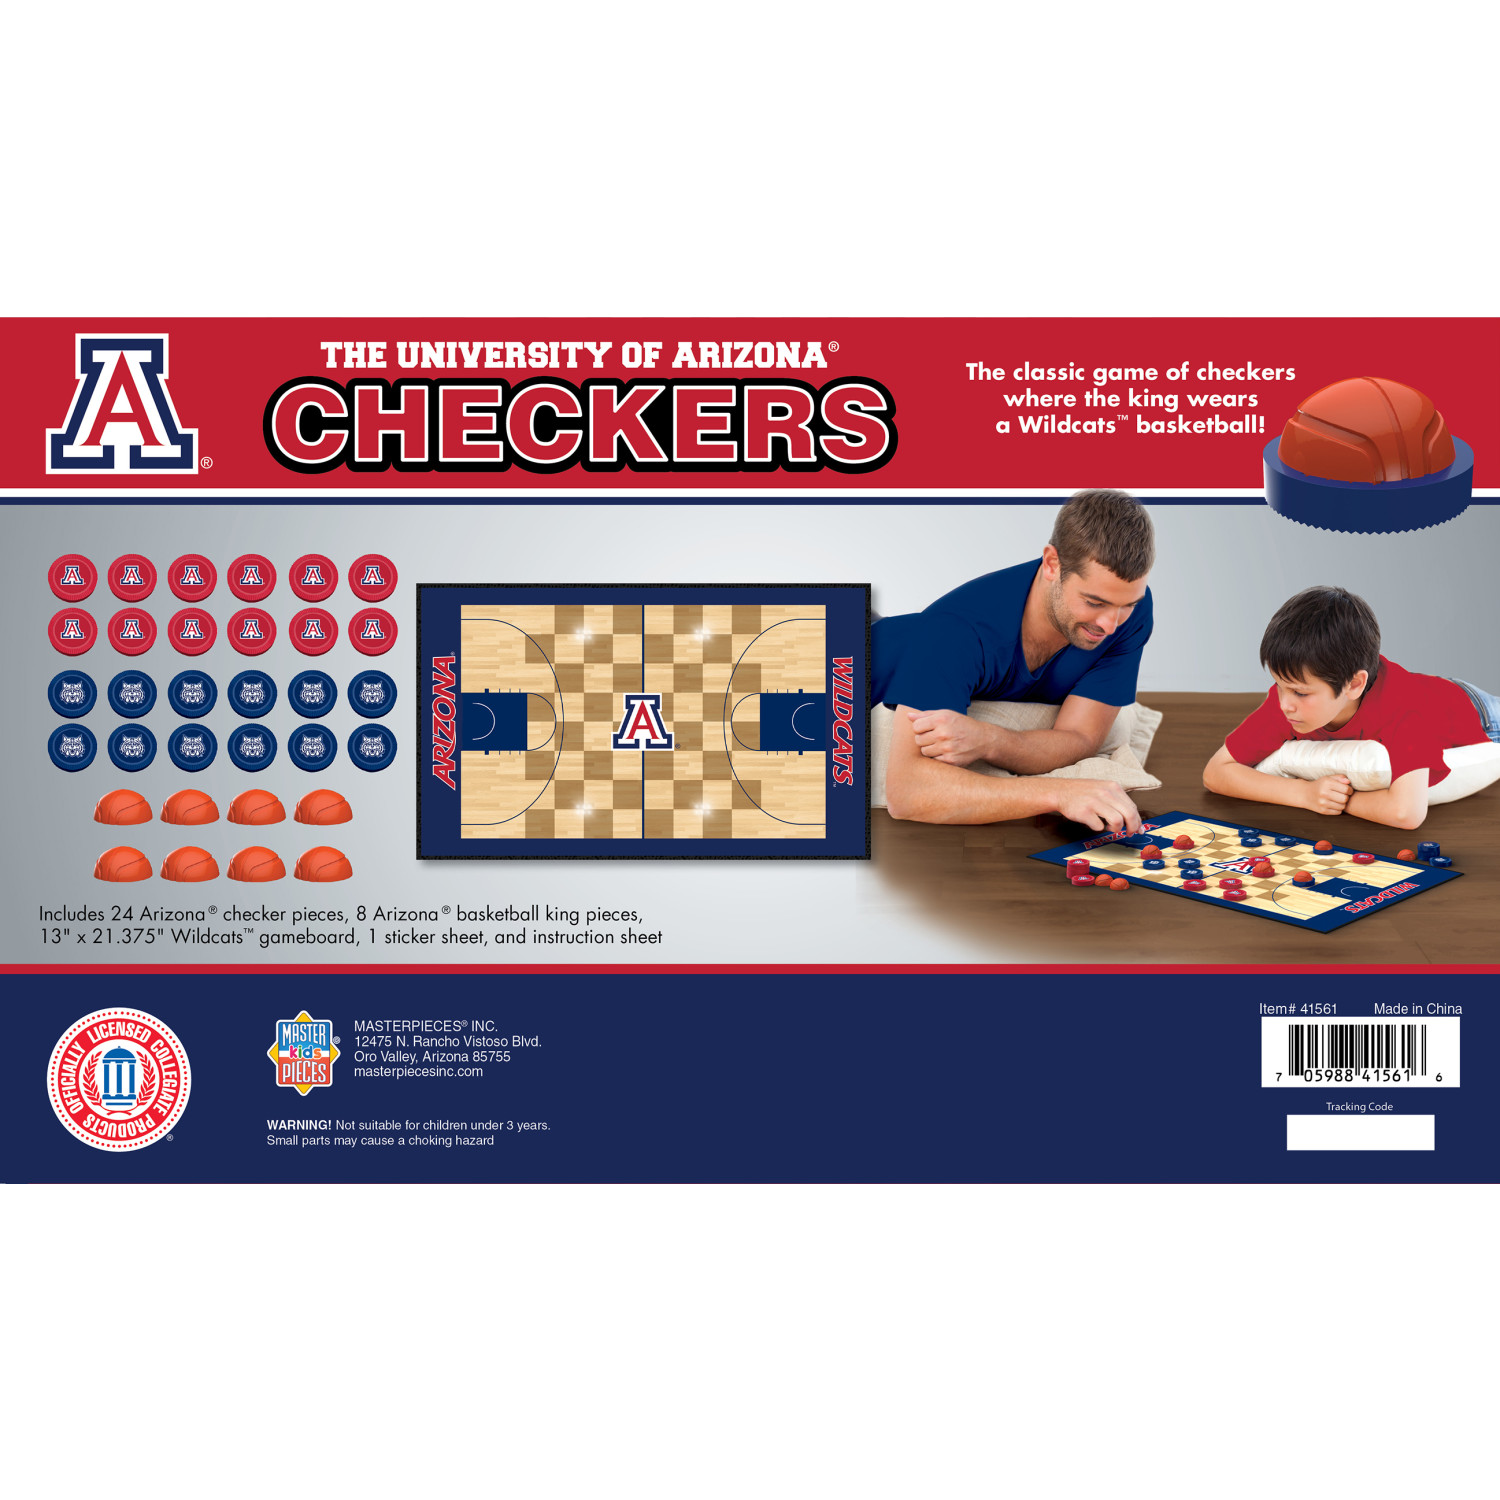 MasterPieces Officially licensed NCAA Arizona Wildcats Checkers Board Game for Families and Kids ages 6 and Up - image 4 of 5